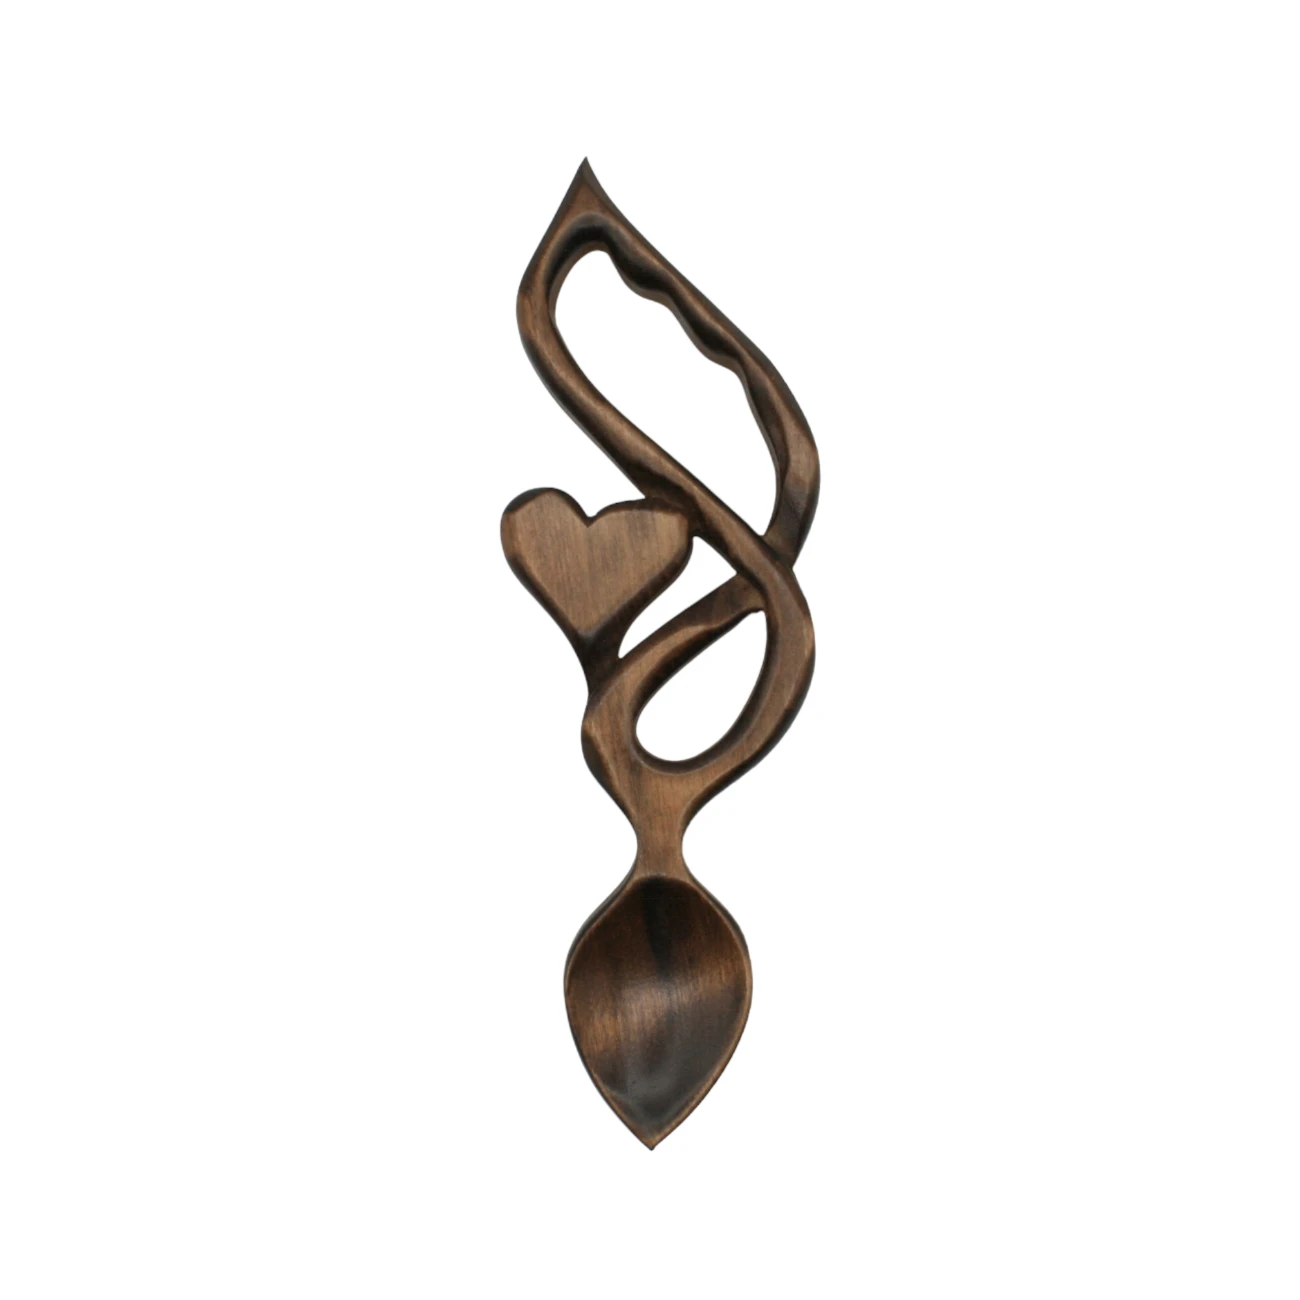 An image of a lovespoon titled Heart & Twist (2)